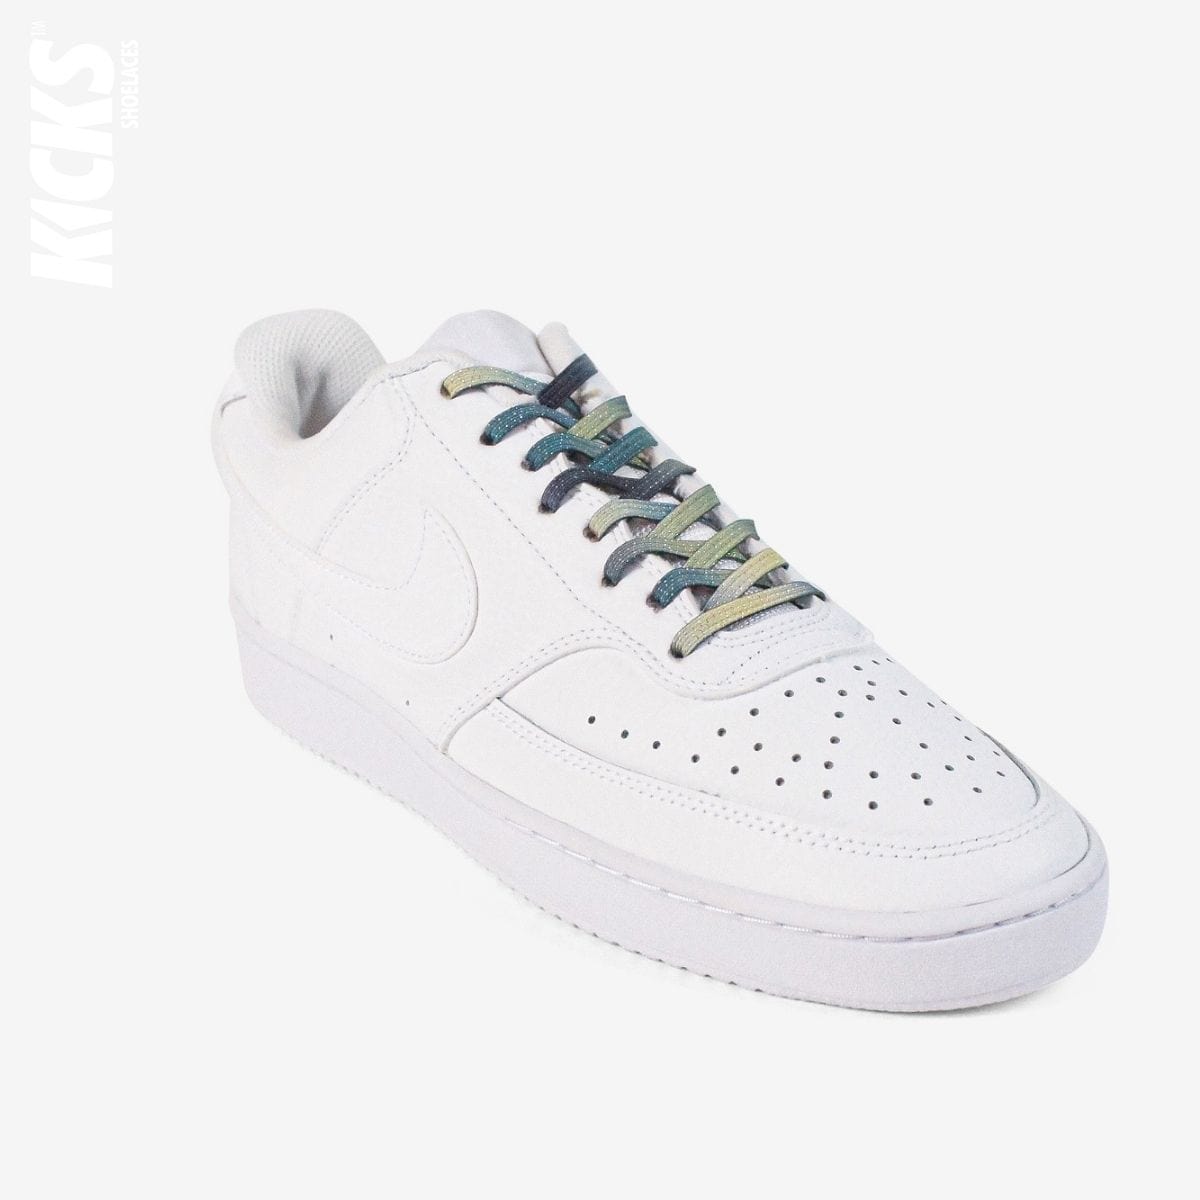 elastic-no-tie-shoelaces-with-starry-sky-laces-on-nike-white-sneakers